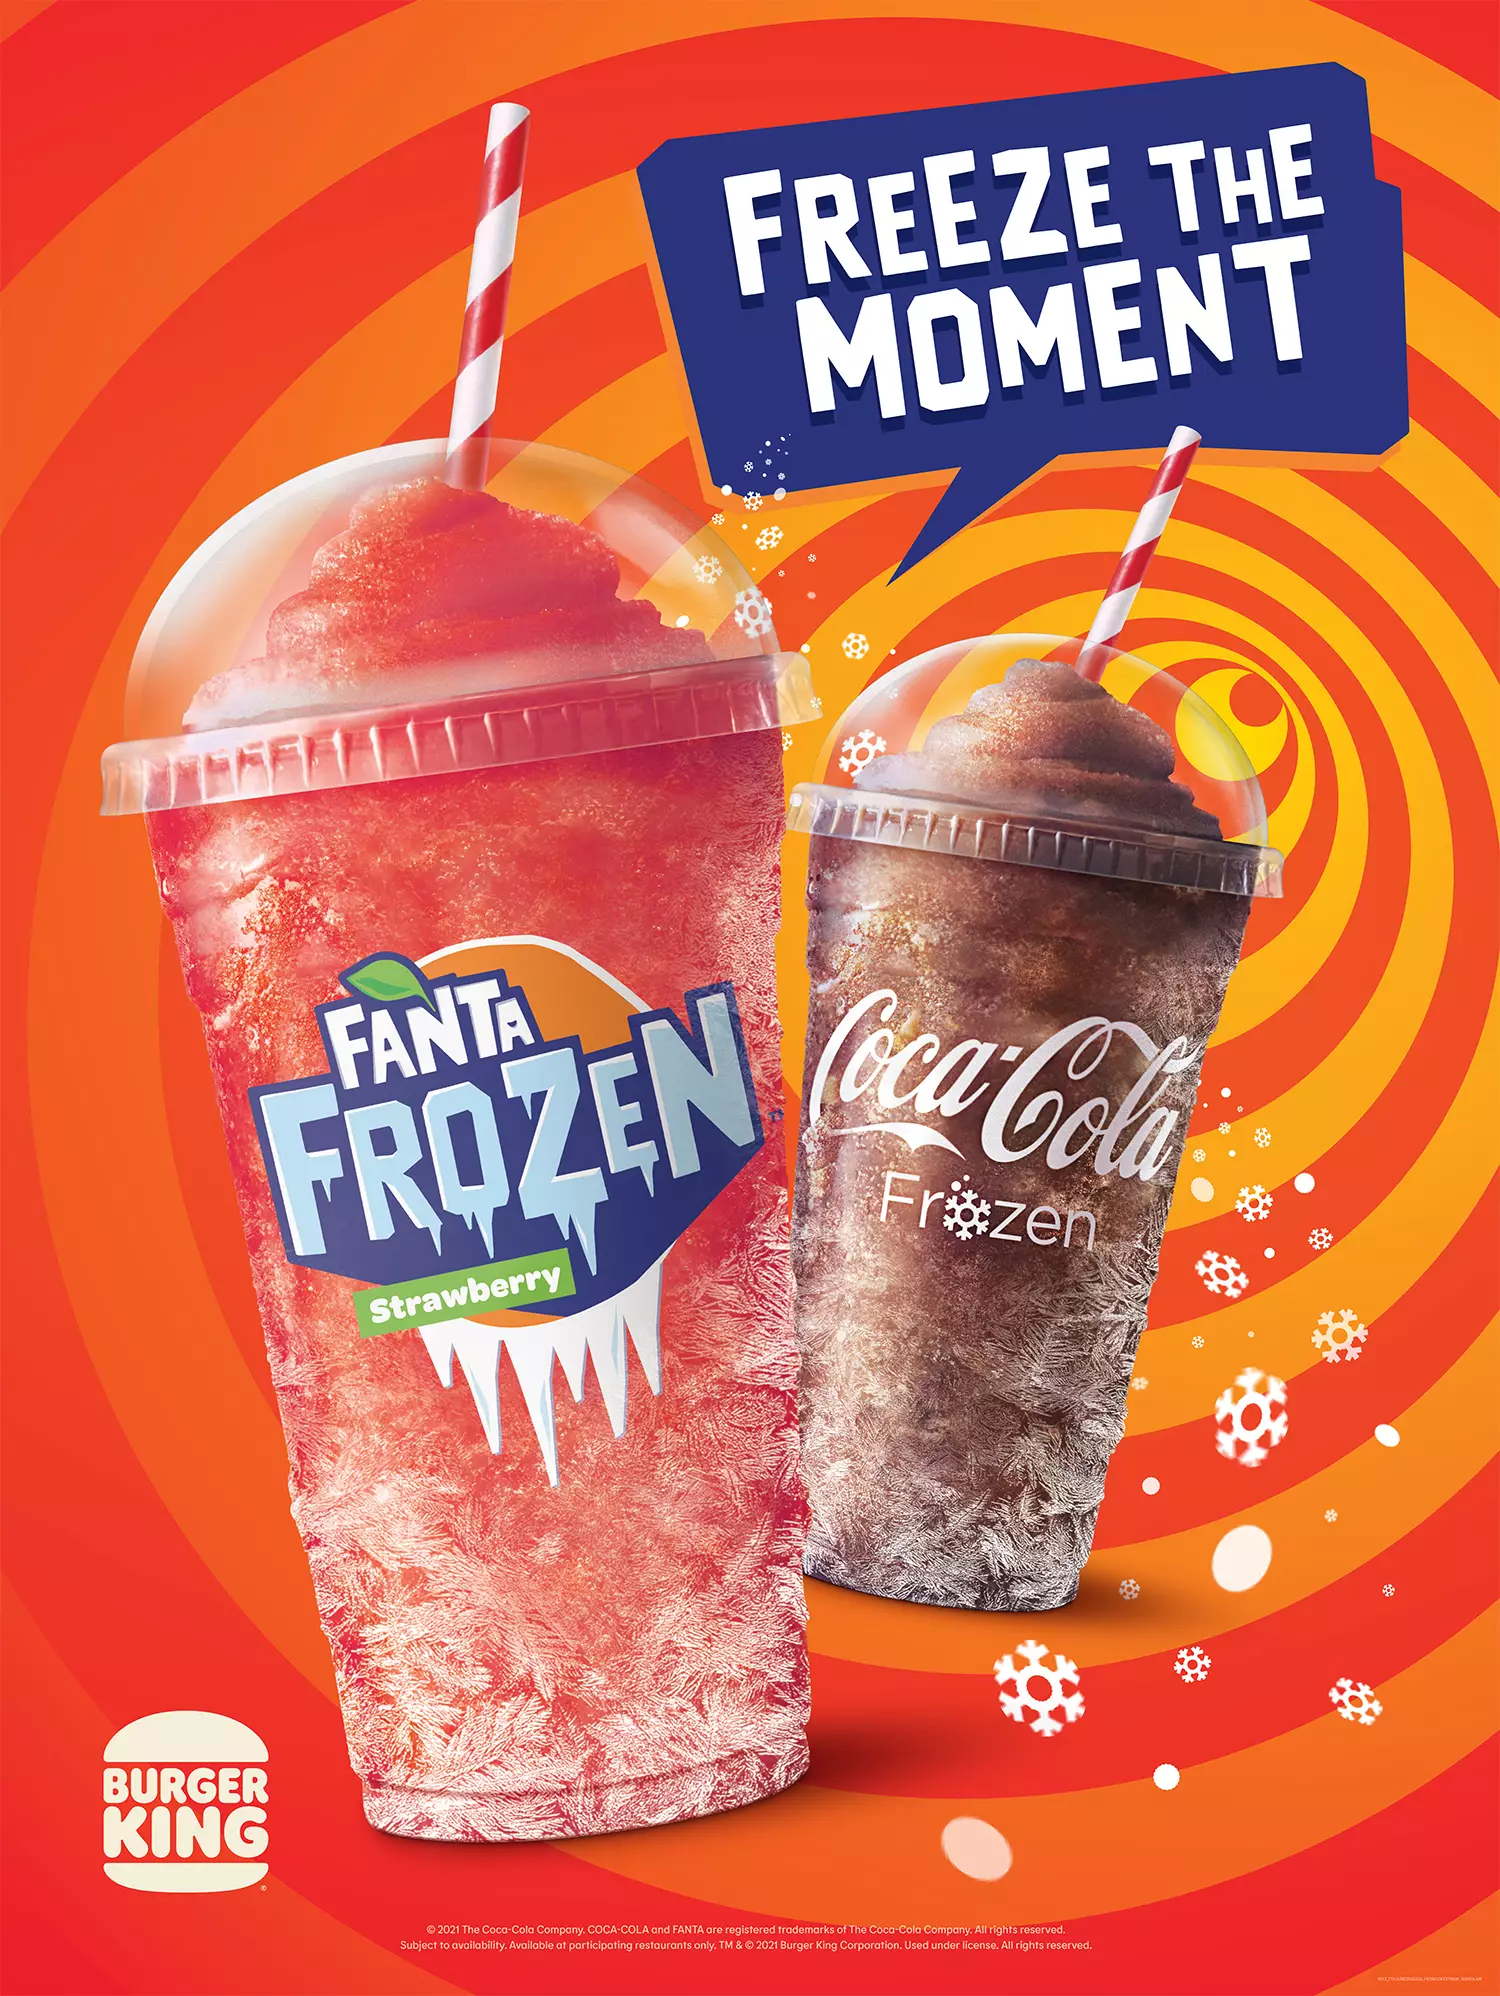 You can now buy Frozen Strawberry Fanta at Burger King (